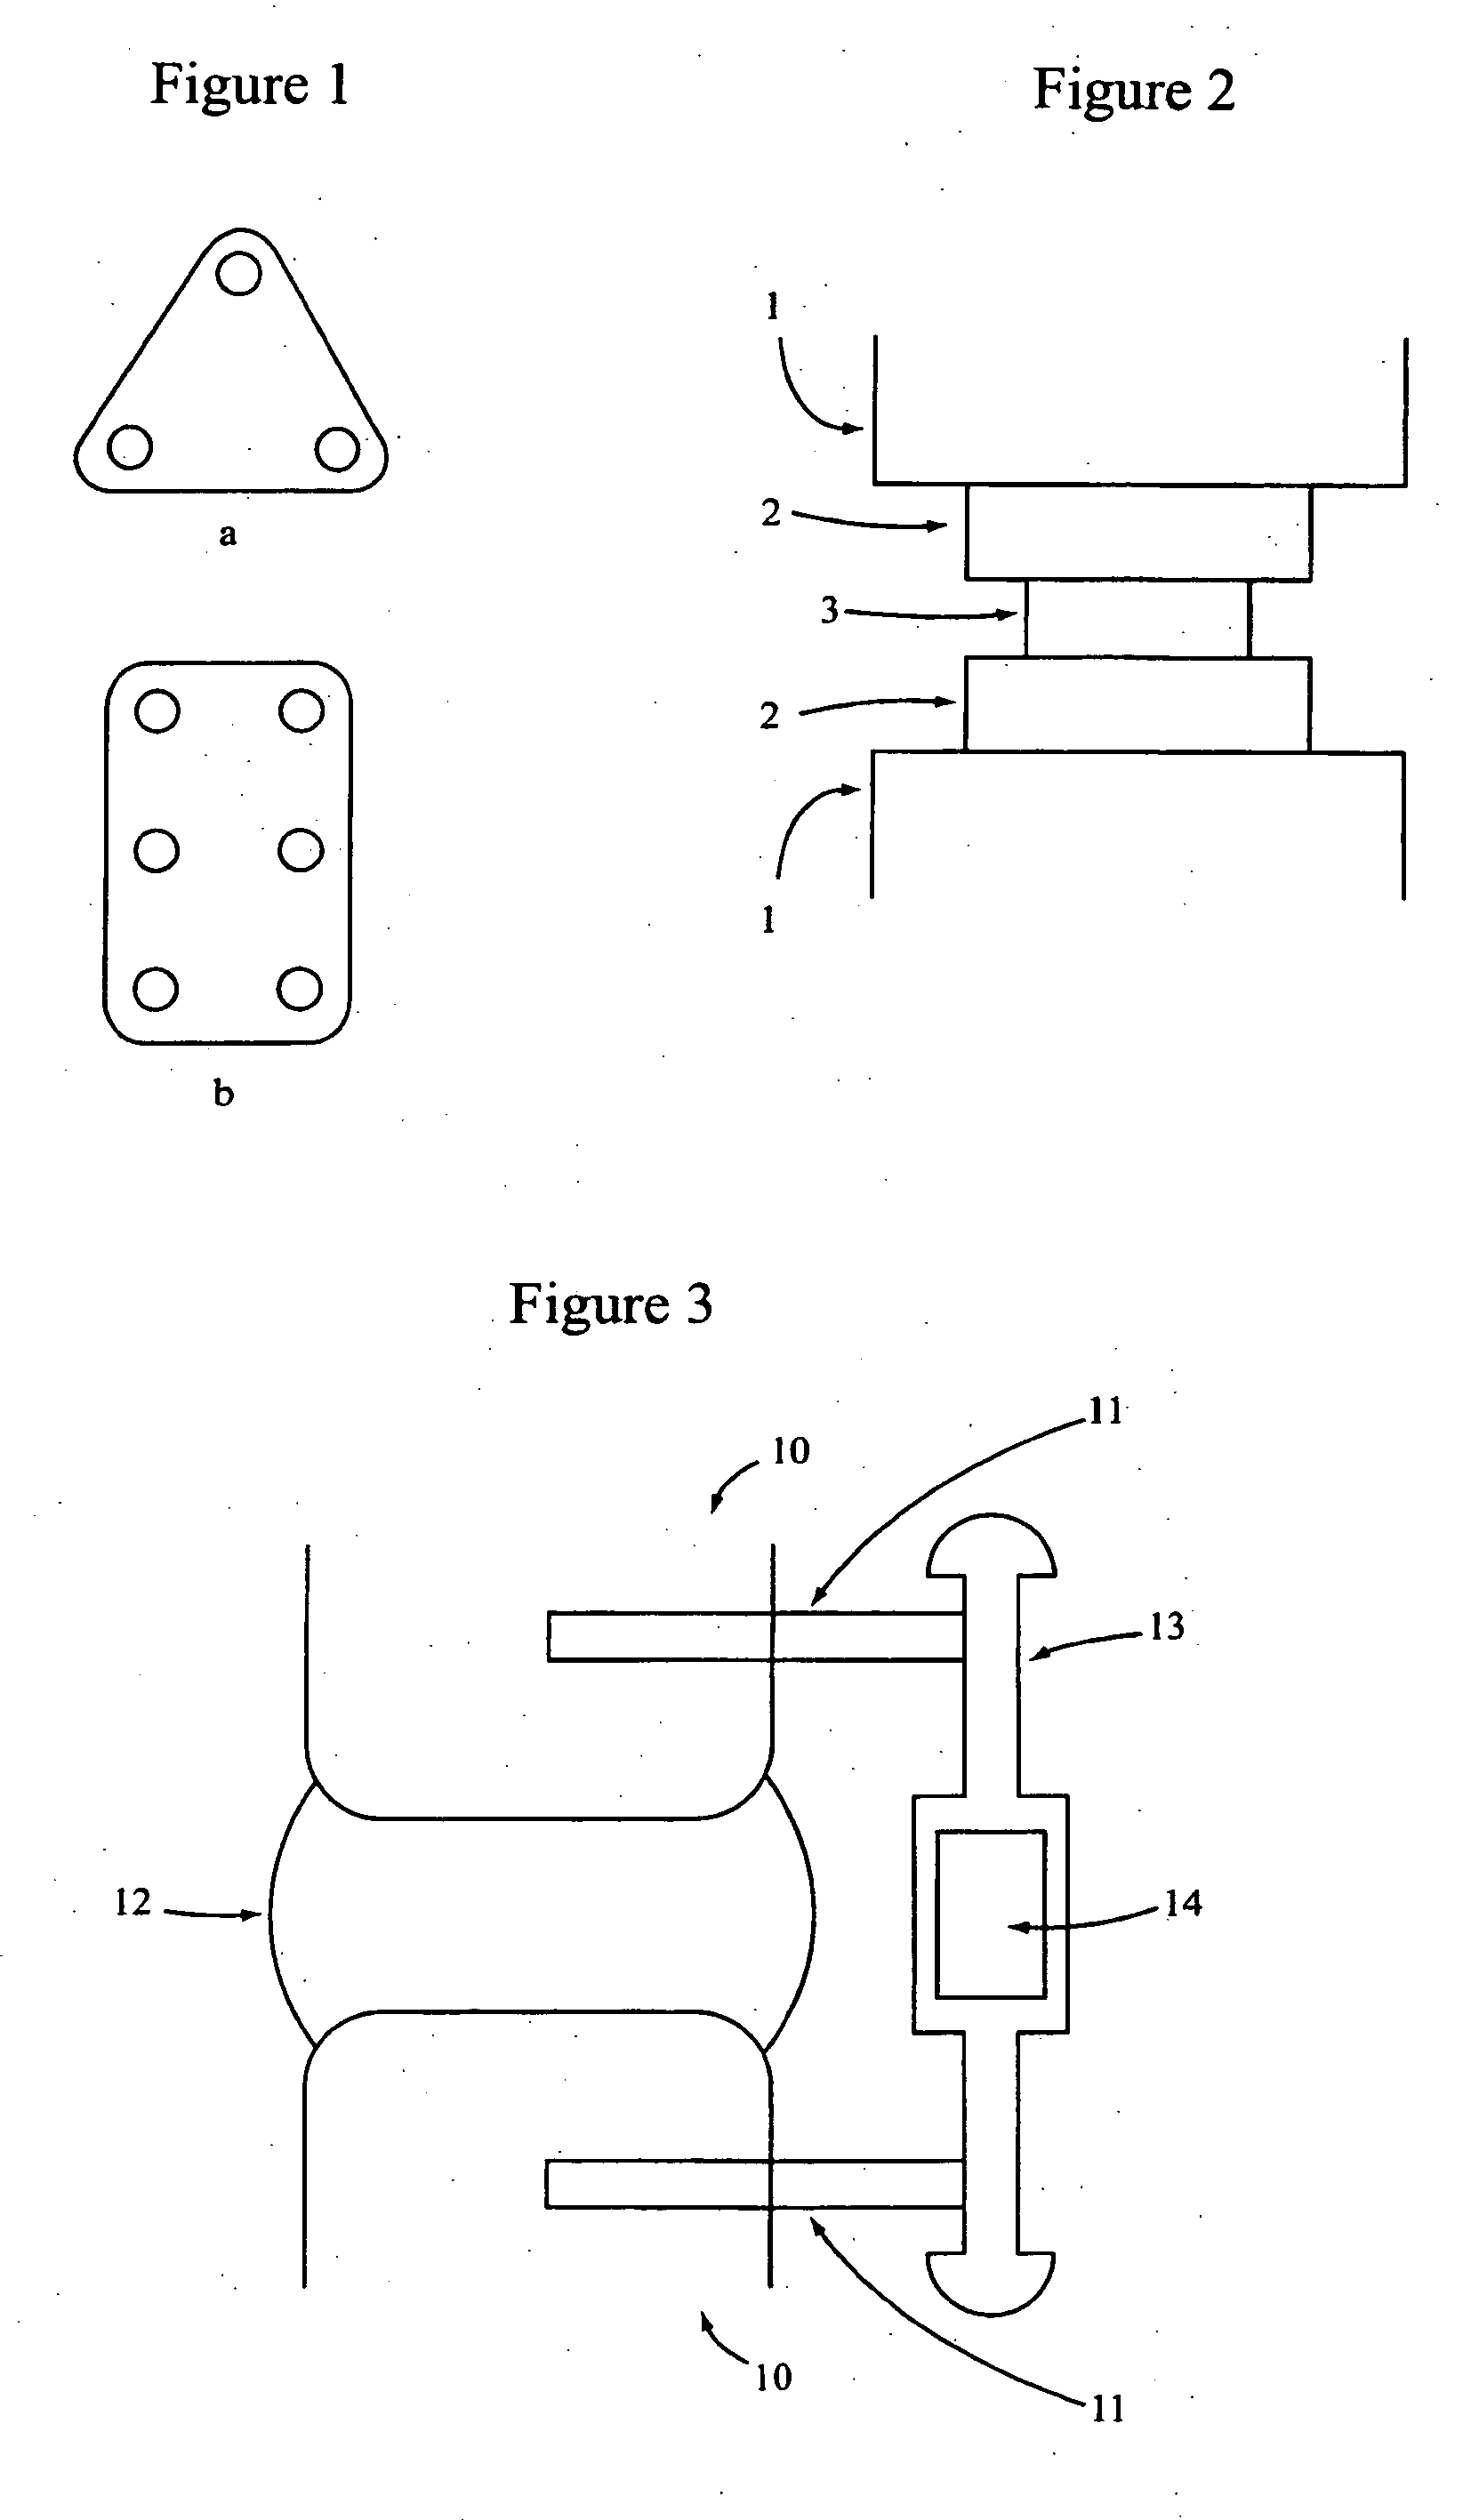 Materials, devices and methods for implantation of transformable implants